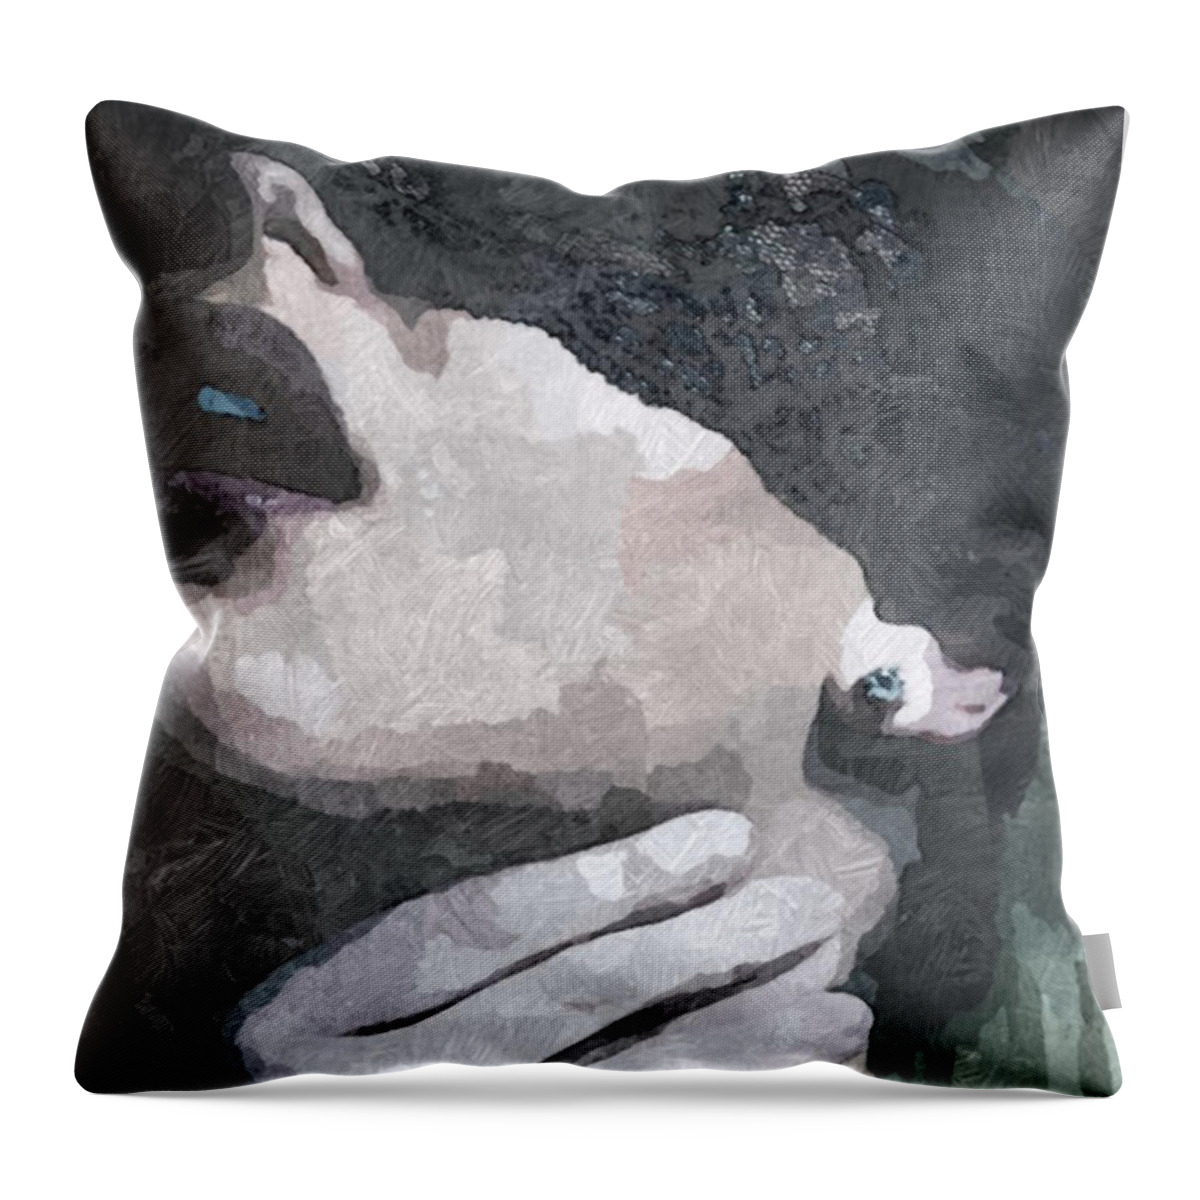 Bdsm Throw Pillow featuring the painting Submission in Black by BDSM love